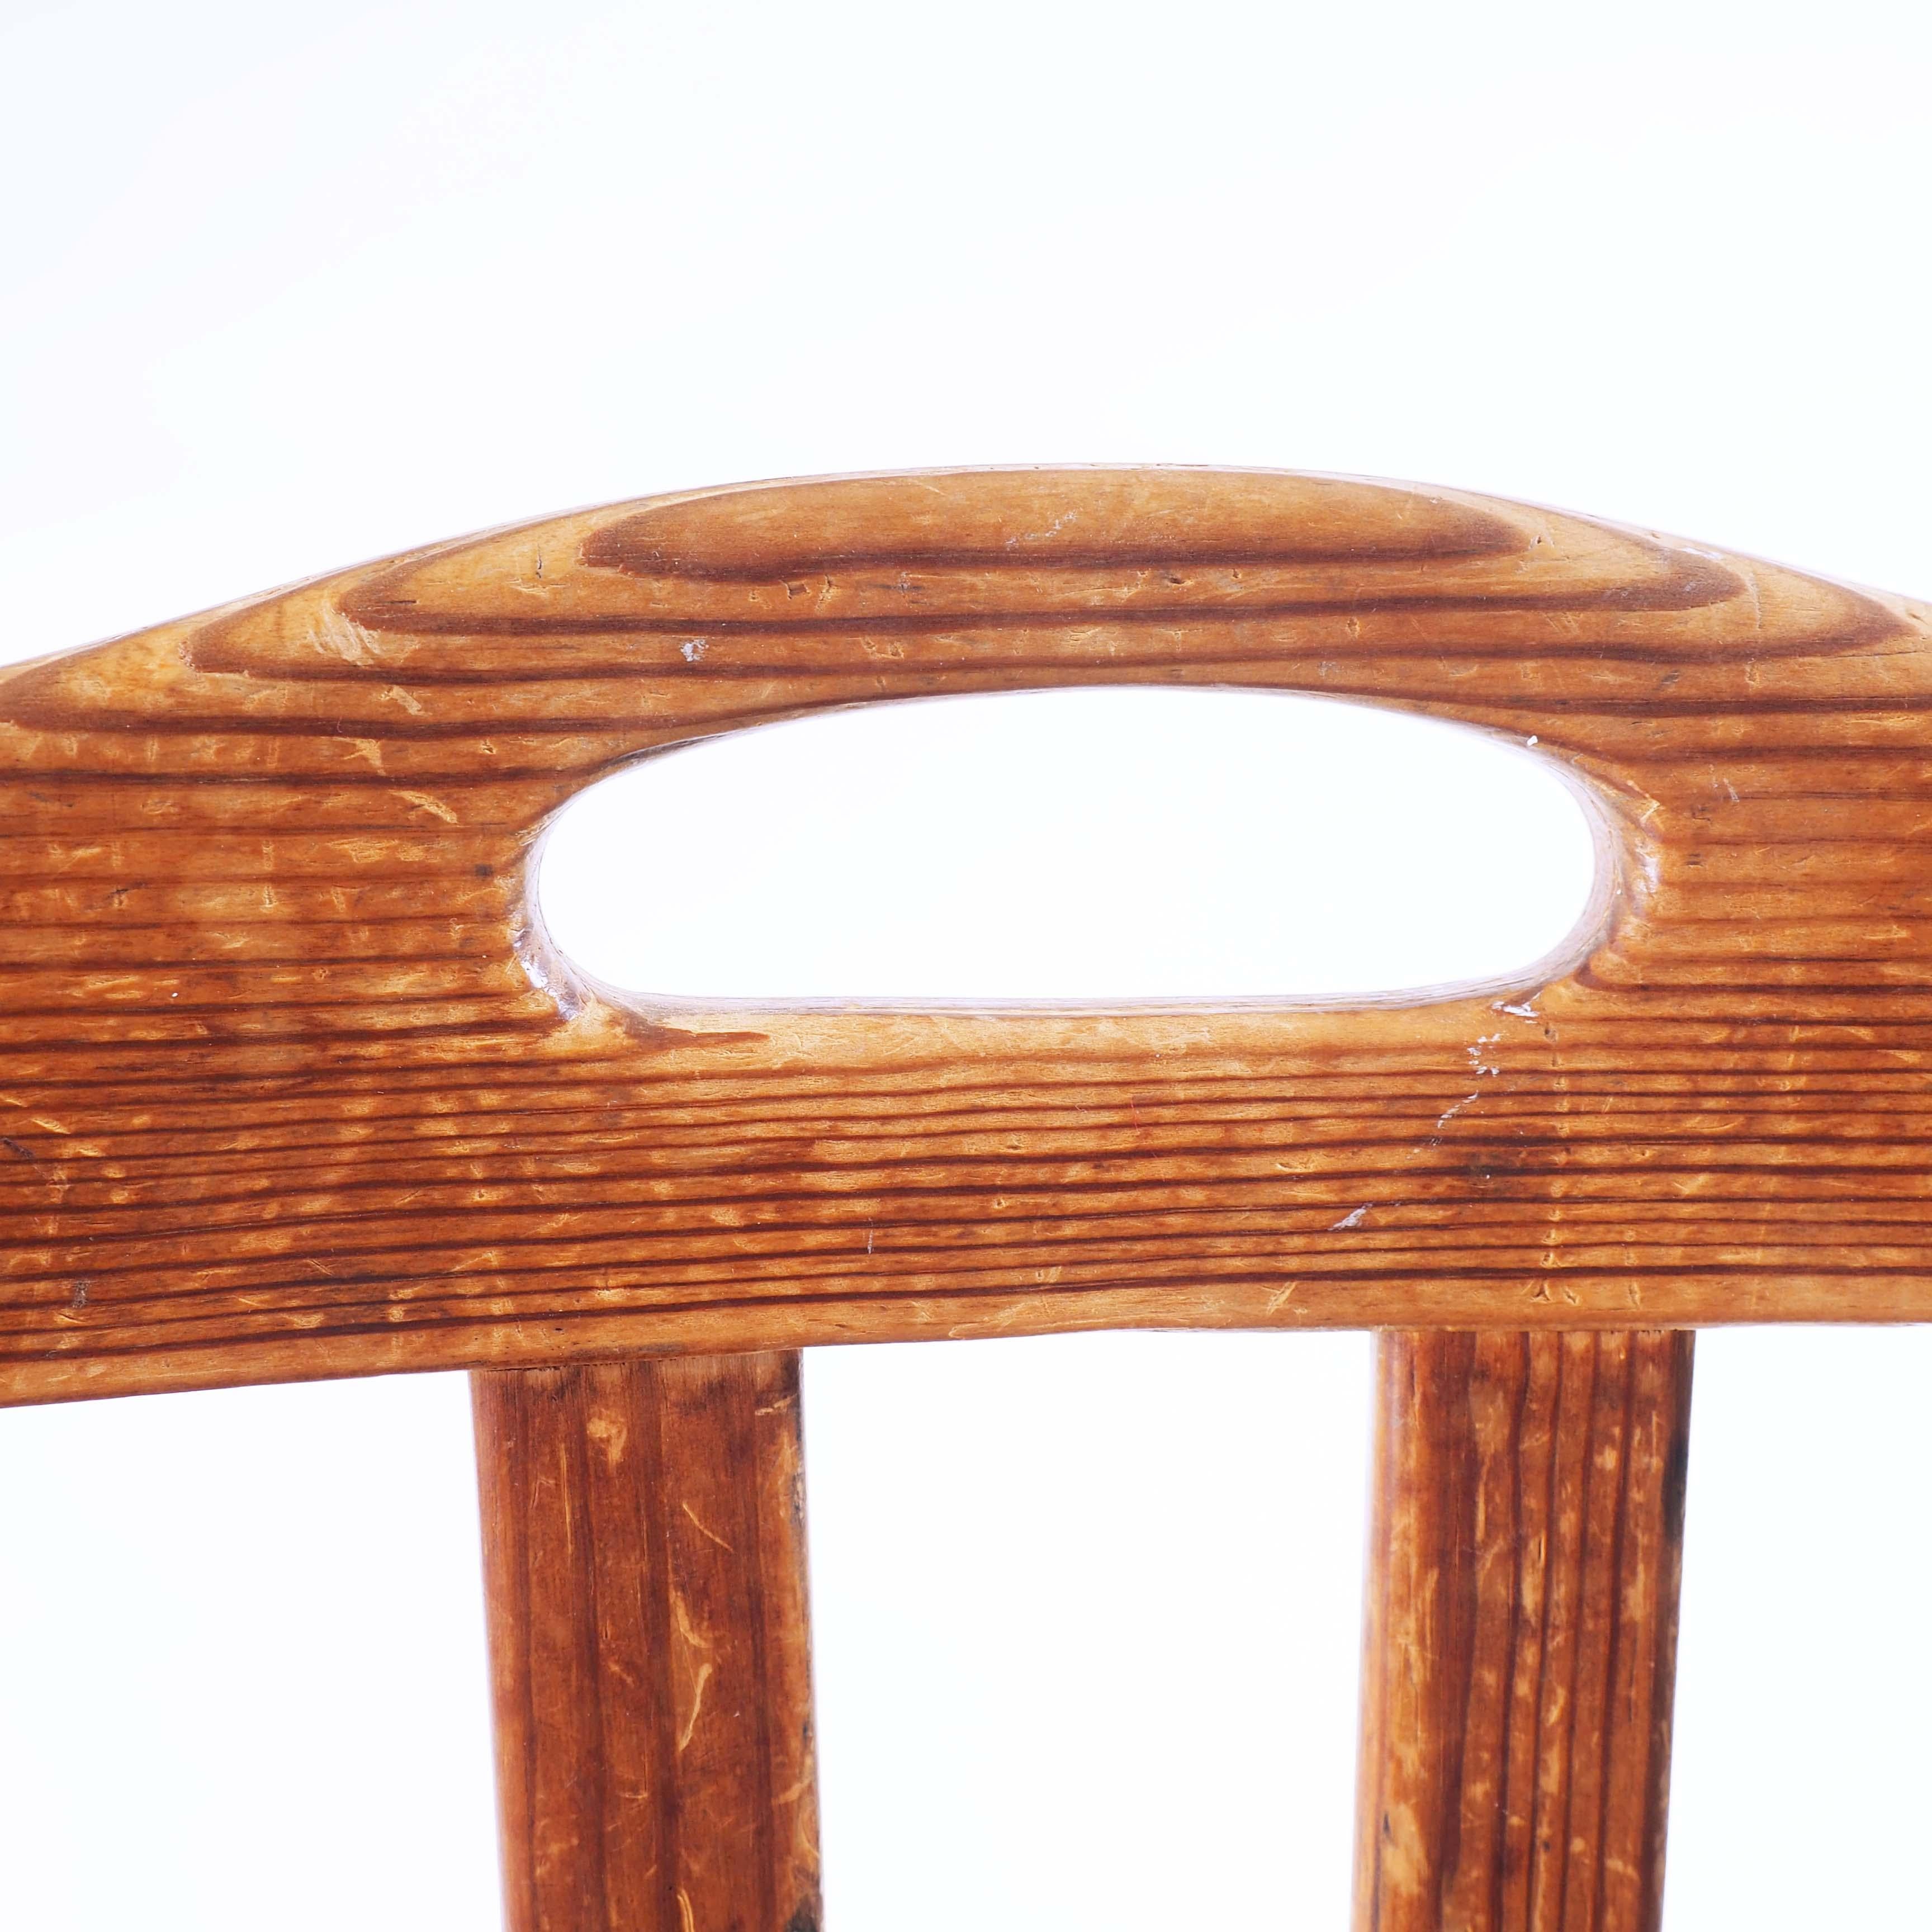 Two chairs in solid pine made for Swedish sport cabins. In Swedish called 